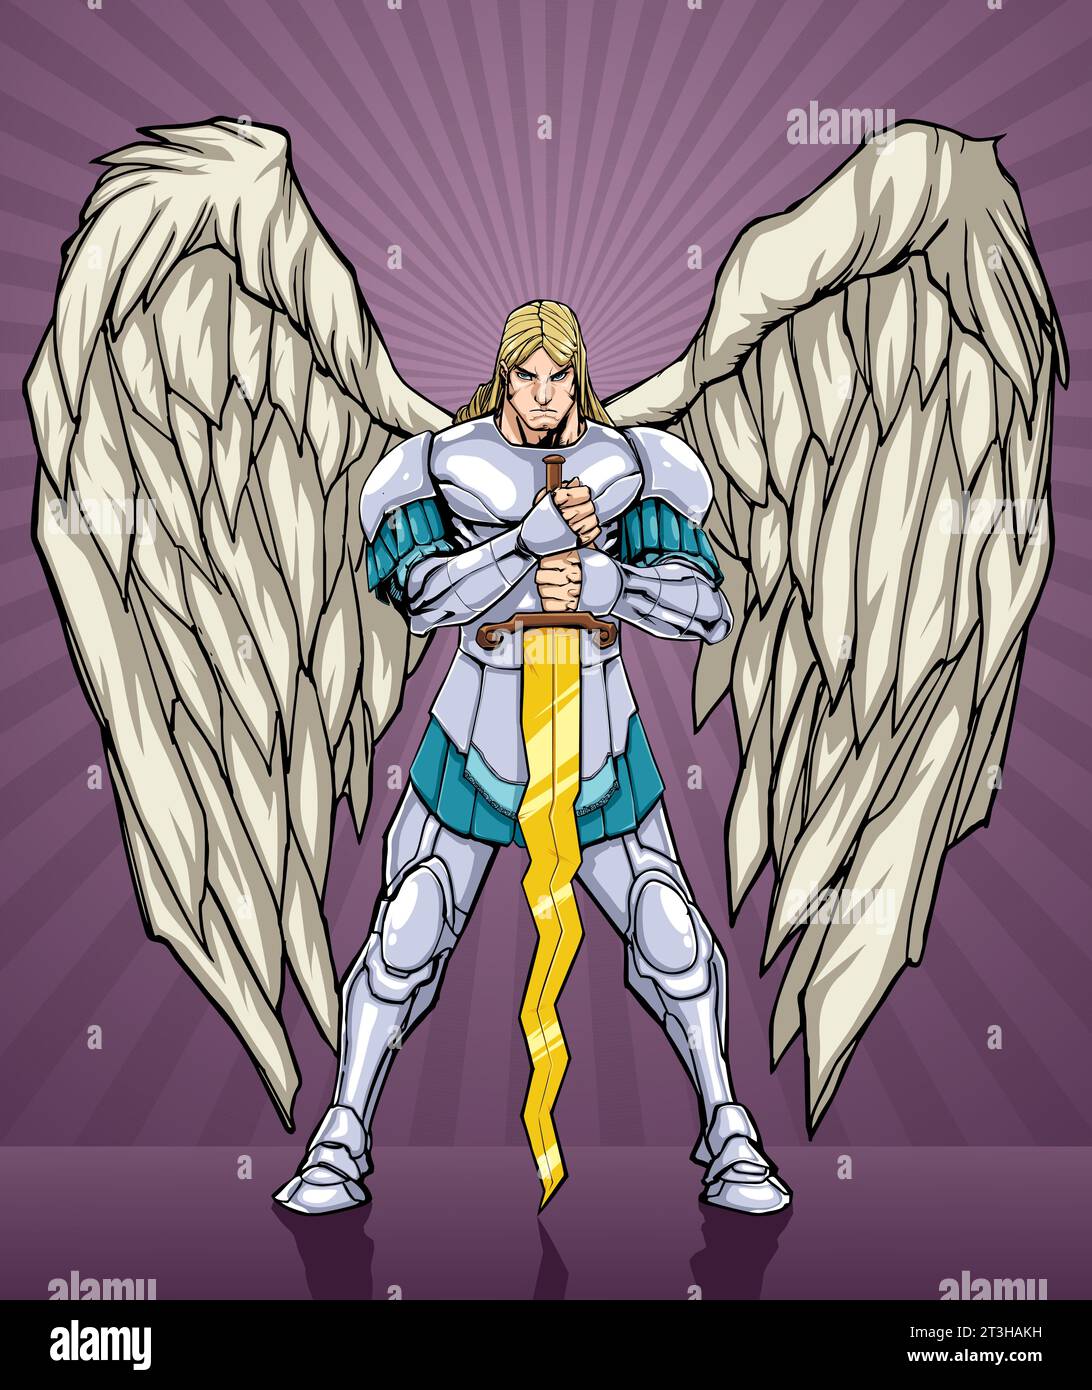 Comic book style depiction of Archangel Michael in silver armor, with expansive wings. Grasping a sword, he stands against a radiant purple background, symbolizing divine strength. Stock Vector